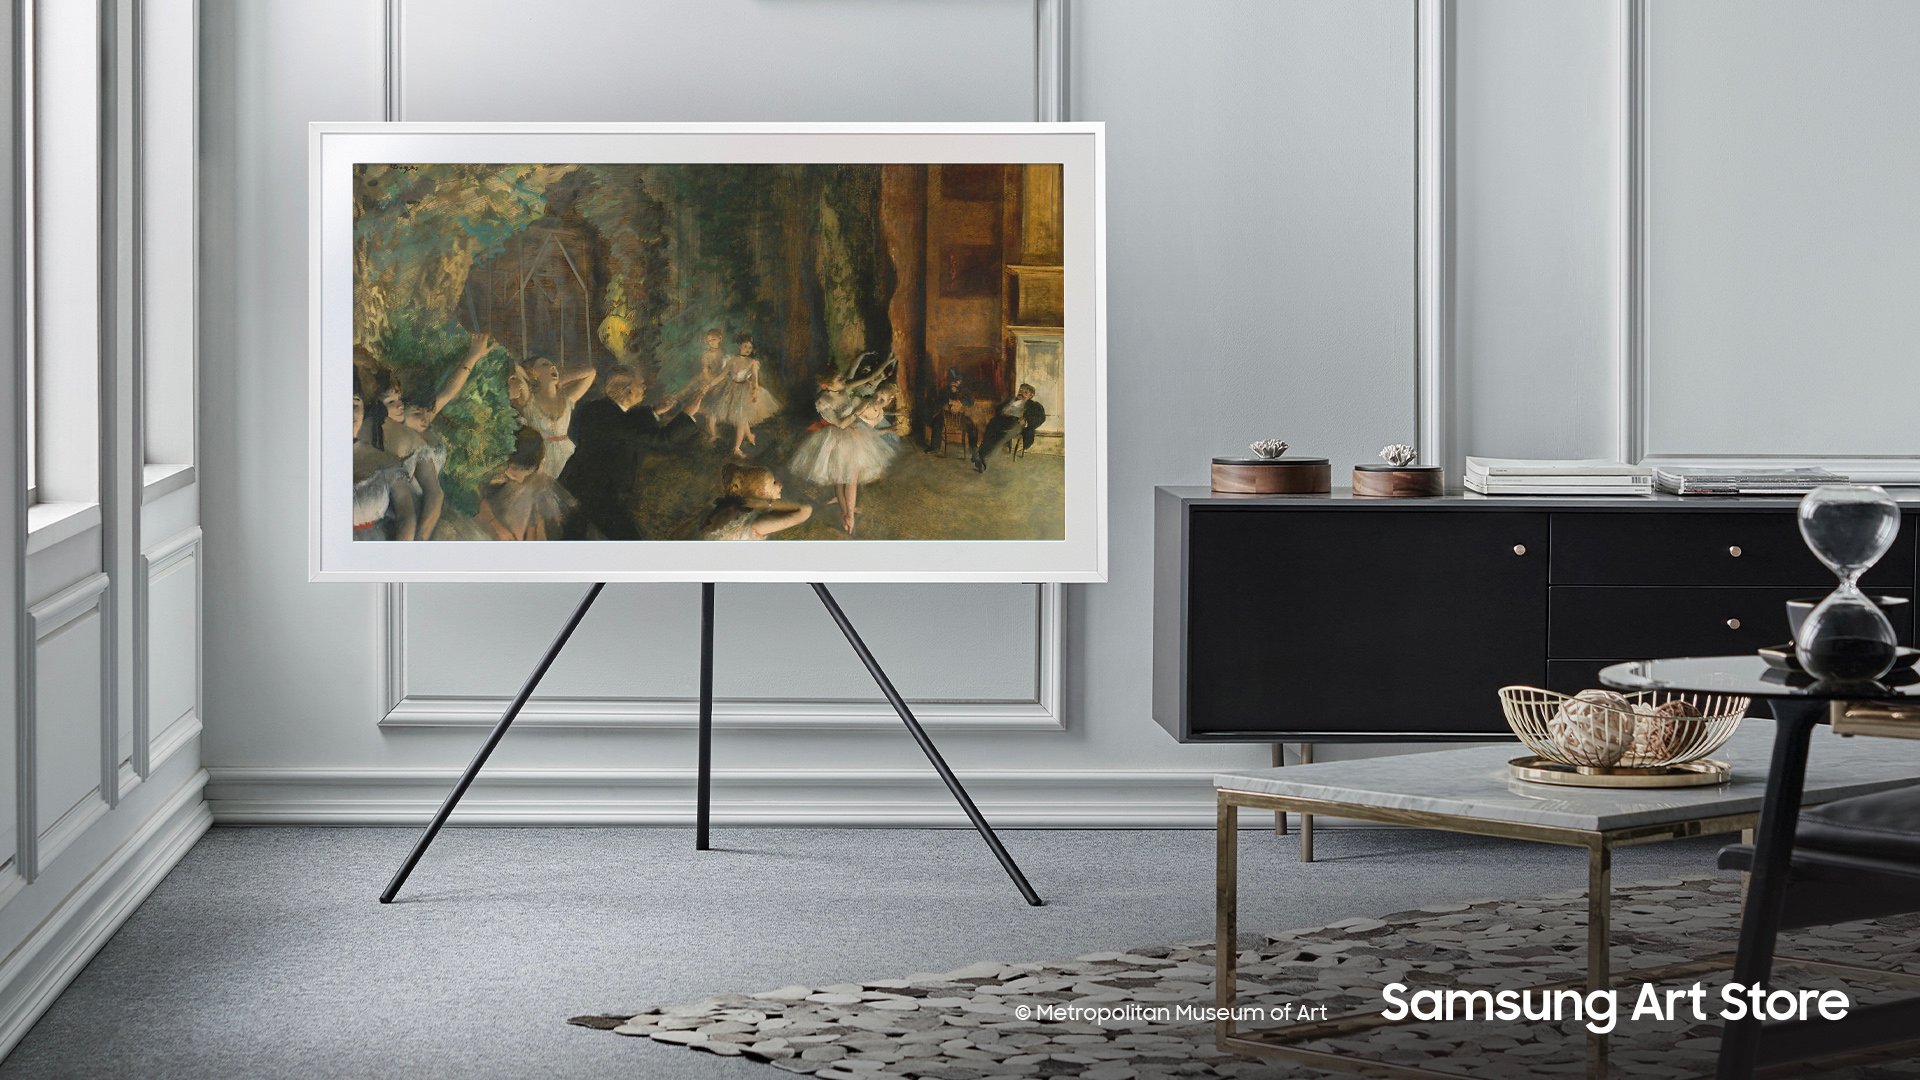 The Frame TV by Samsung - Contemporary - Bedroom - New York - by